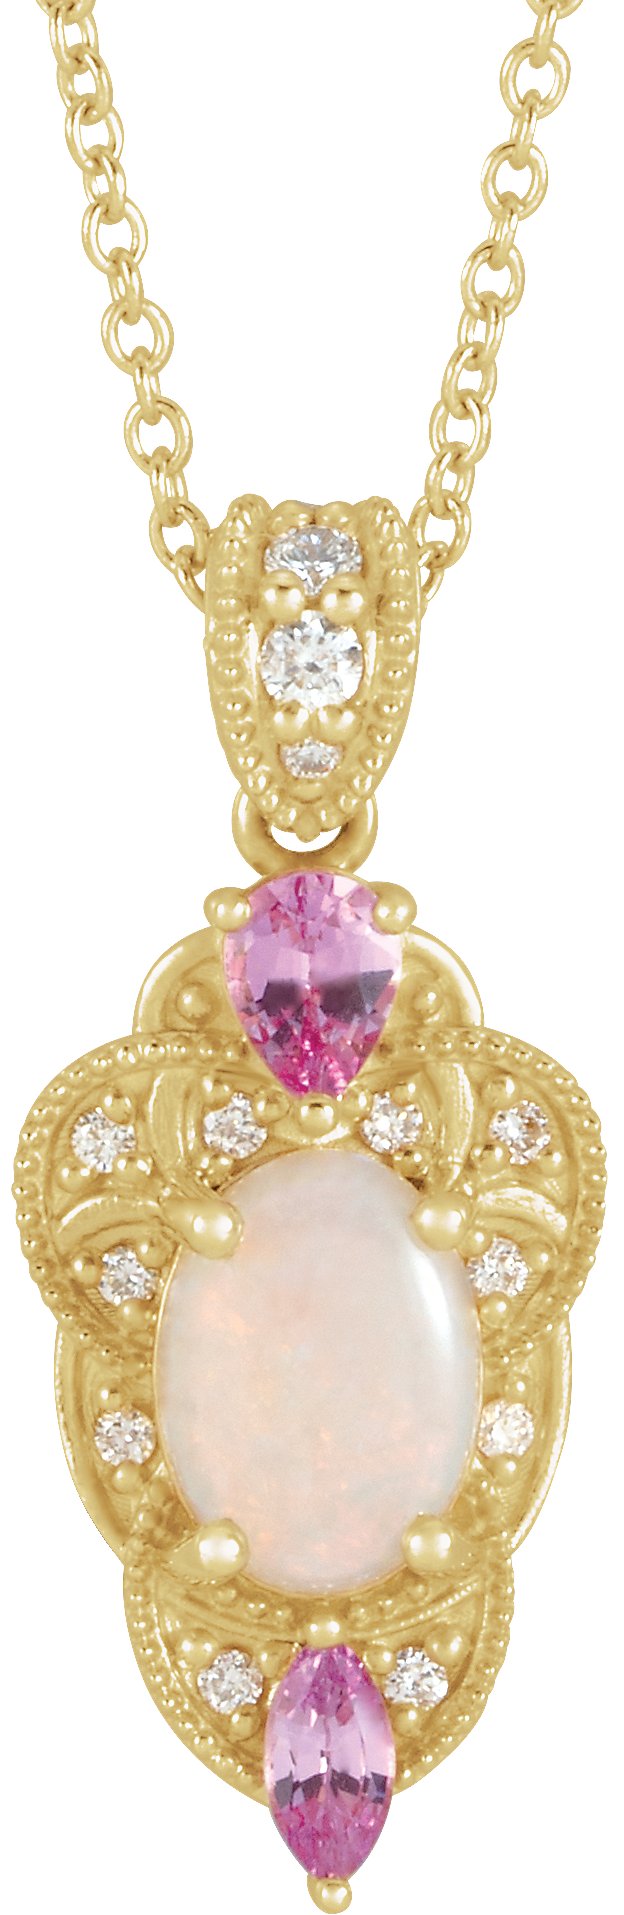 14K Yellow Opal, Pink Sapphire & 1/10 CTW Diamond Vintage-Inspired 16-18" Necklace